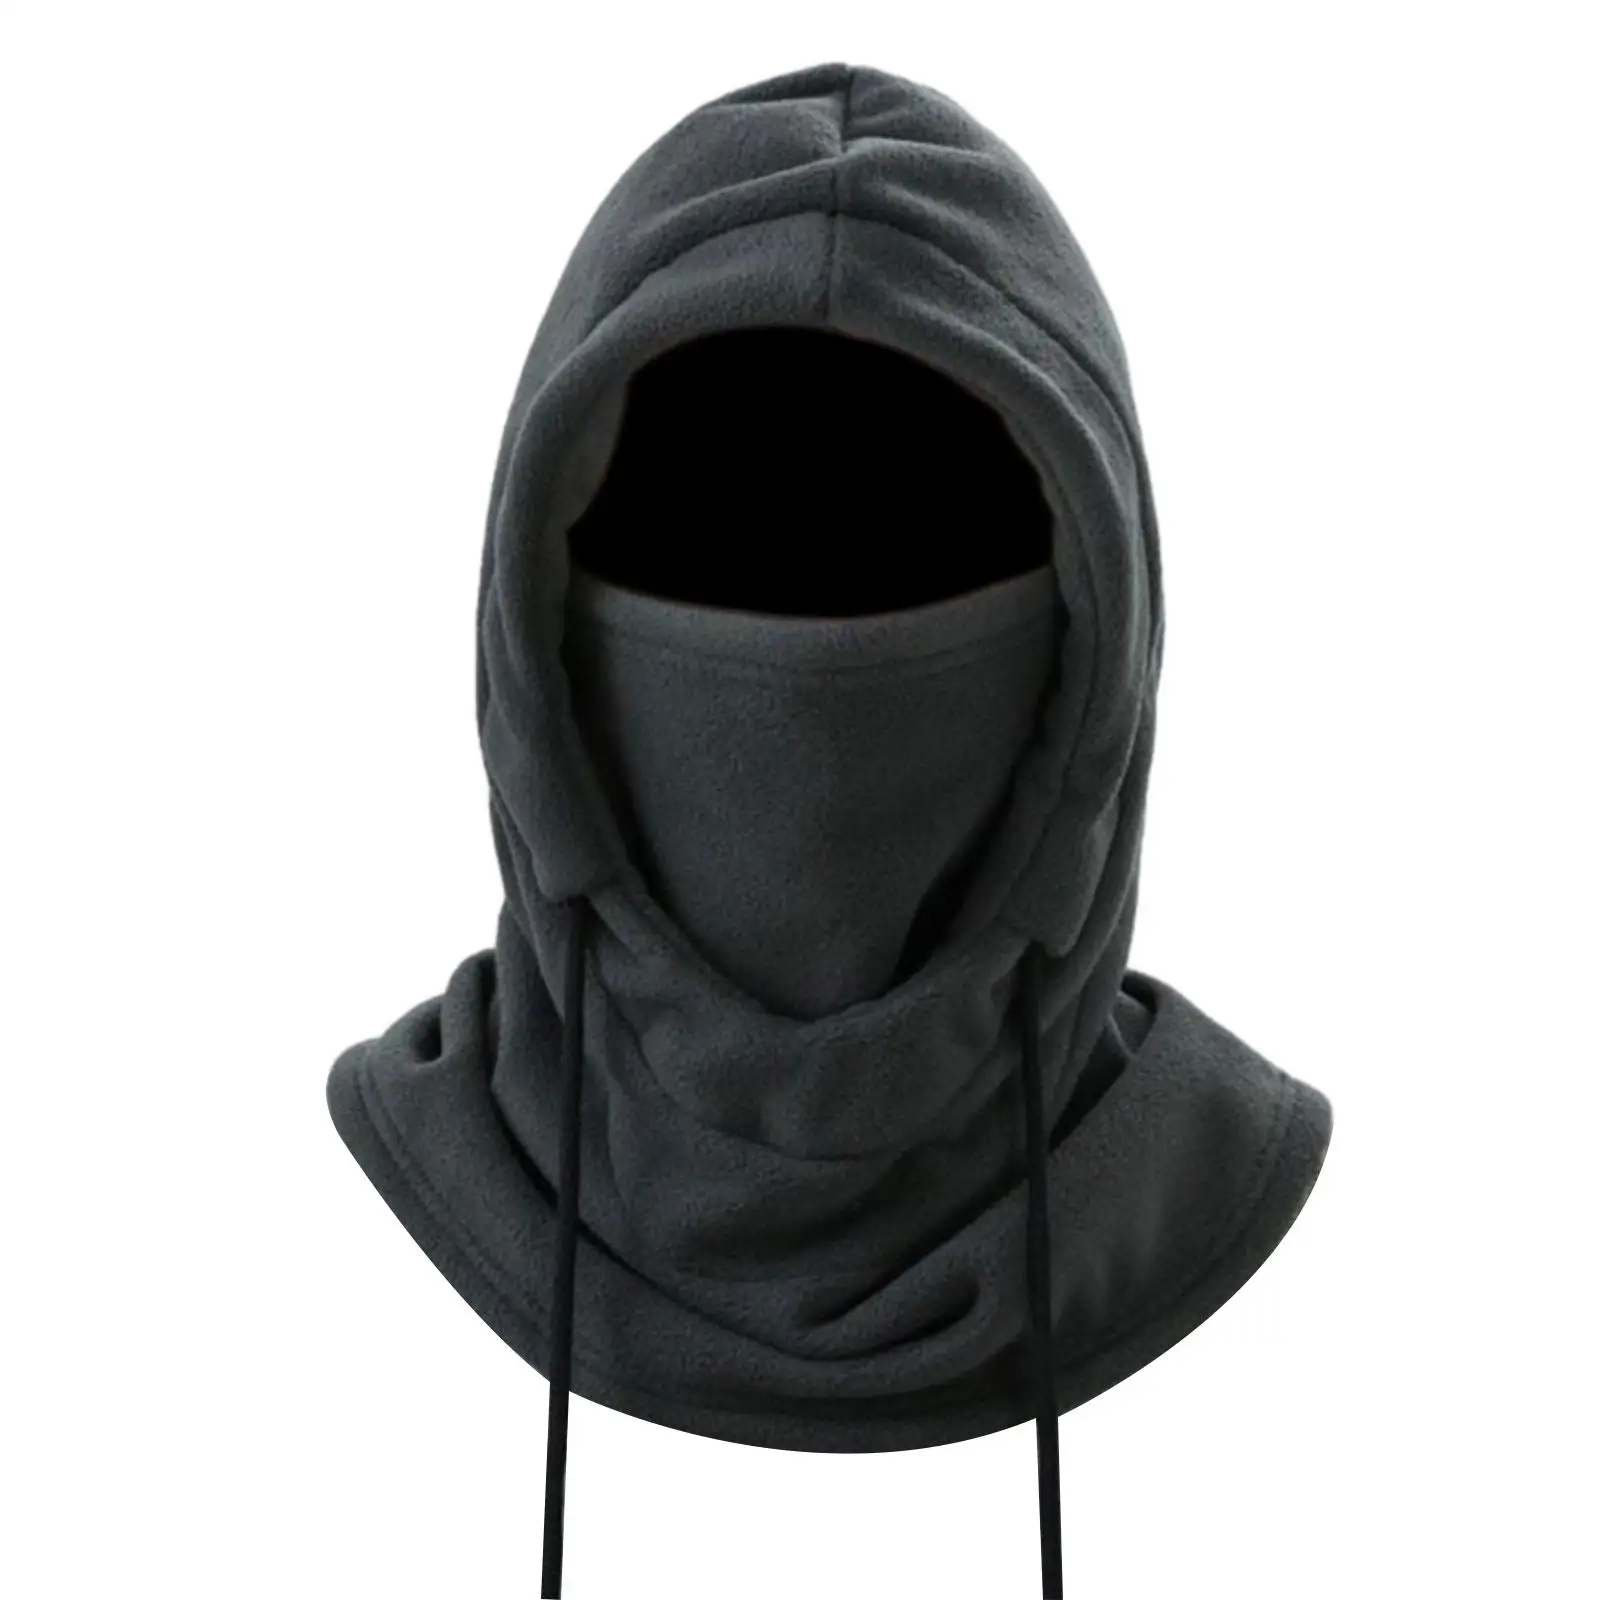 Balaclava Hooded Neck Warmer Winter Hat for Skating Outdoor Sports Climbing